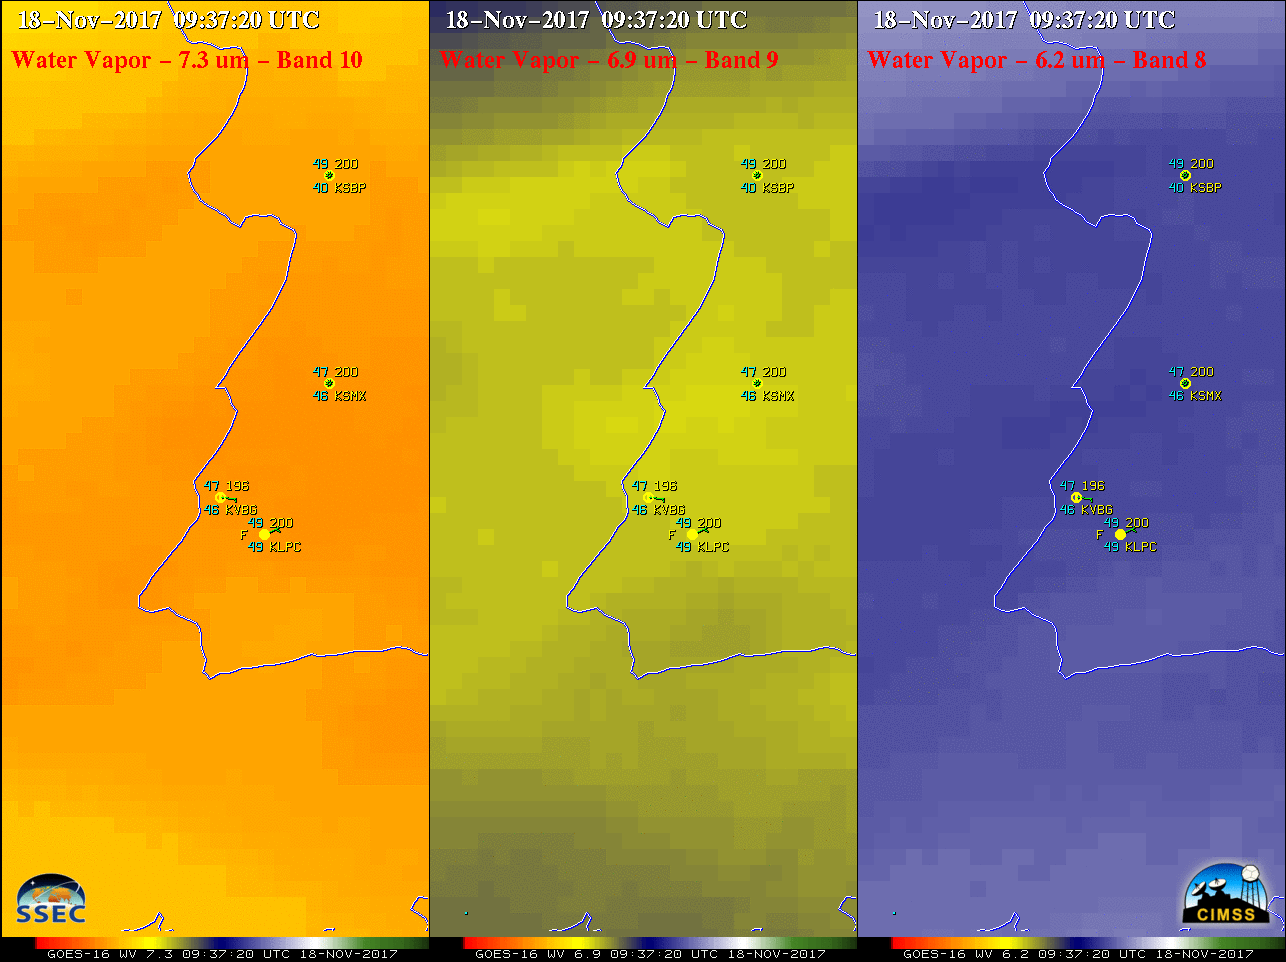 GOES-16 Lower-level (7.3 µm, left), Mid-level (6.9 µm, center) and Upper-level (6.2 µm, right) Water Vapor images, with plots of surface reports [click to enlarge]